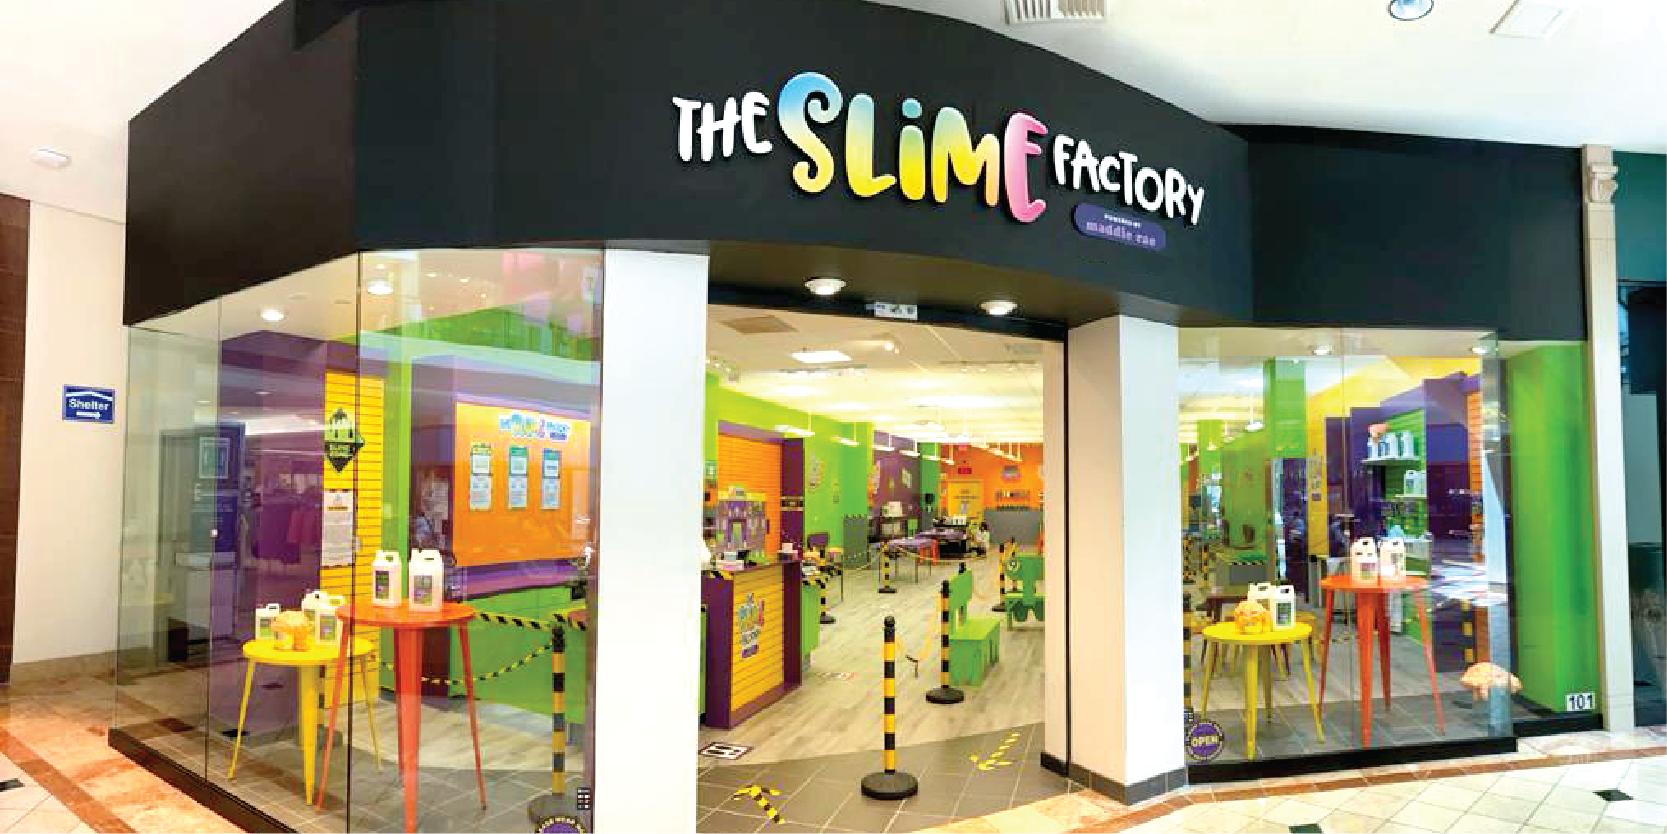 Slime Factory – Gifted